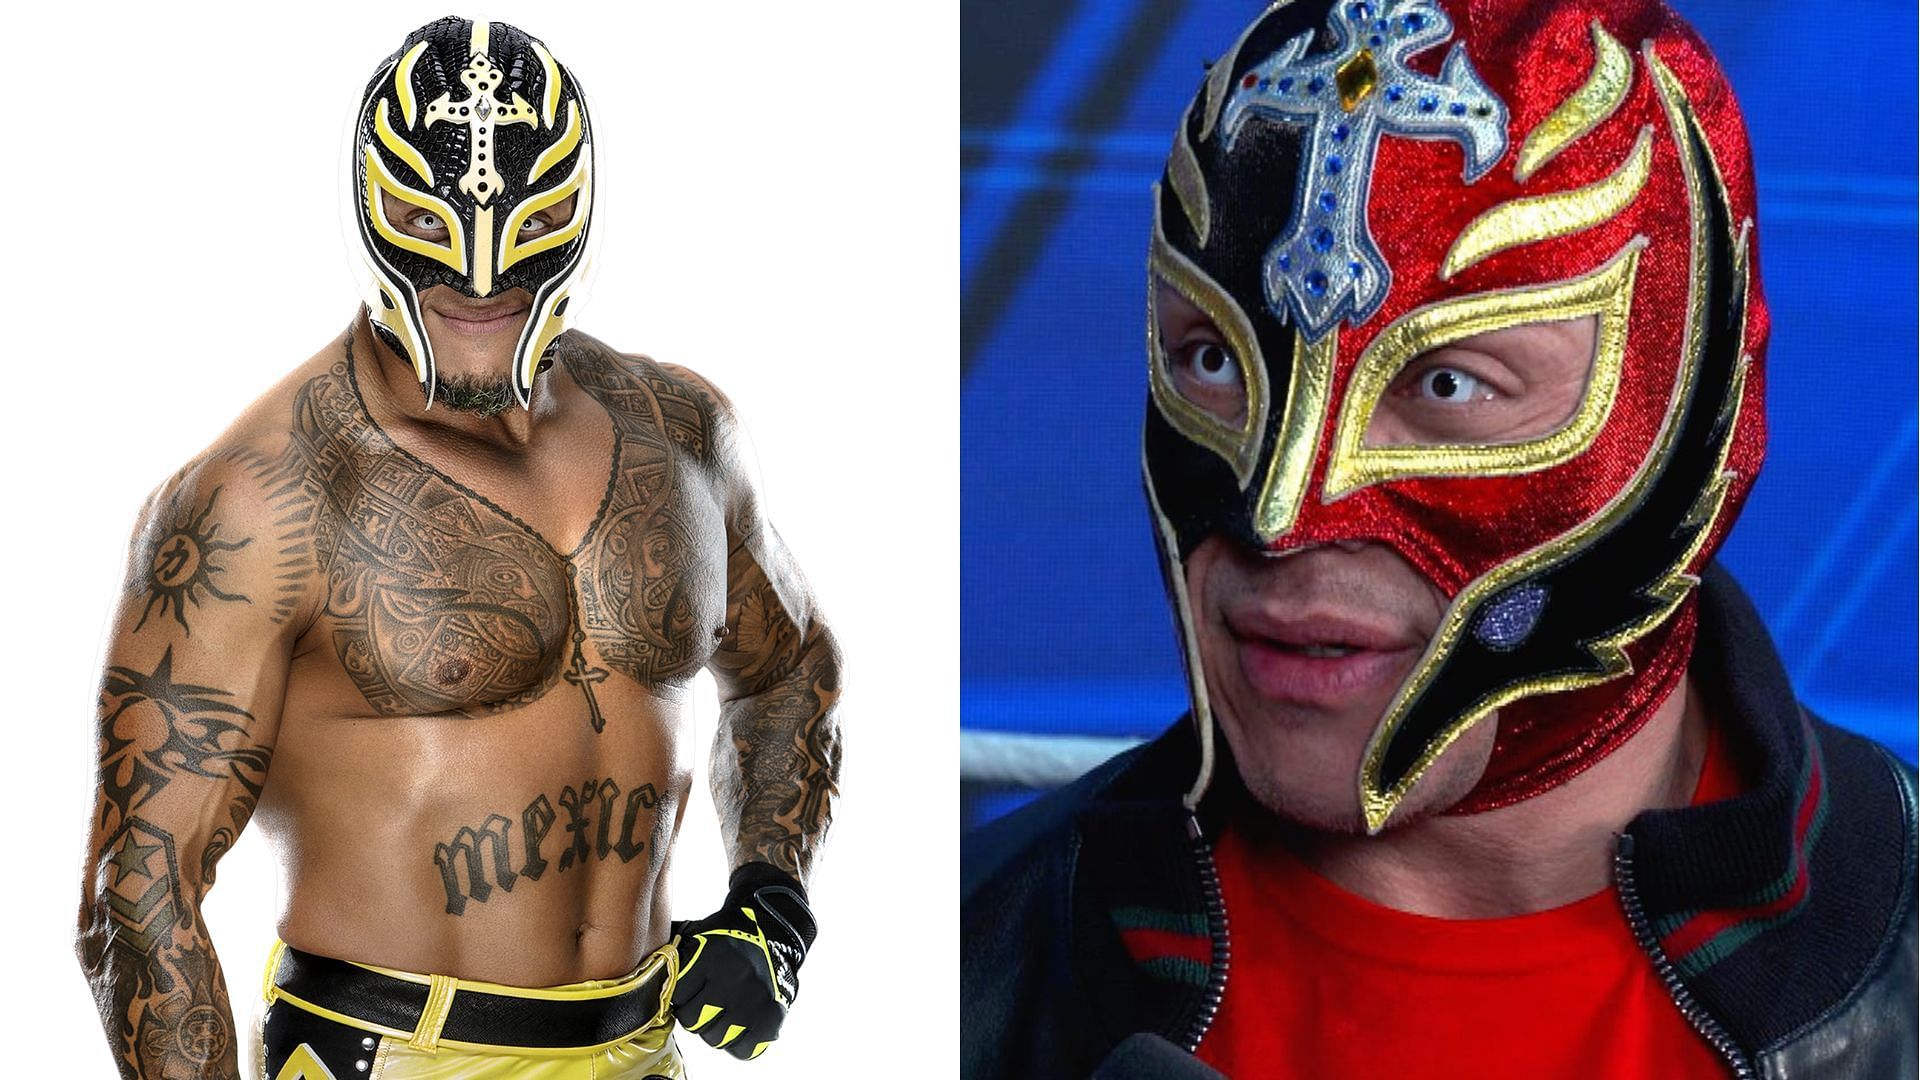 Rey Mysterio was seen backstage in WWE not wearing his iconic mask